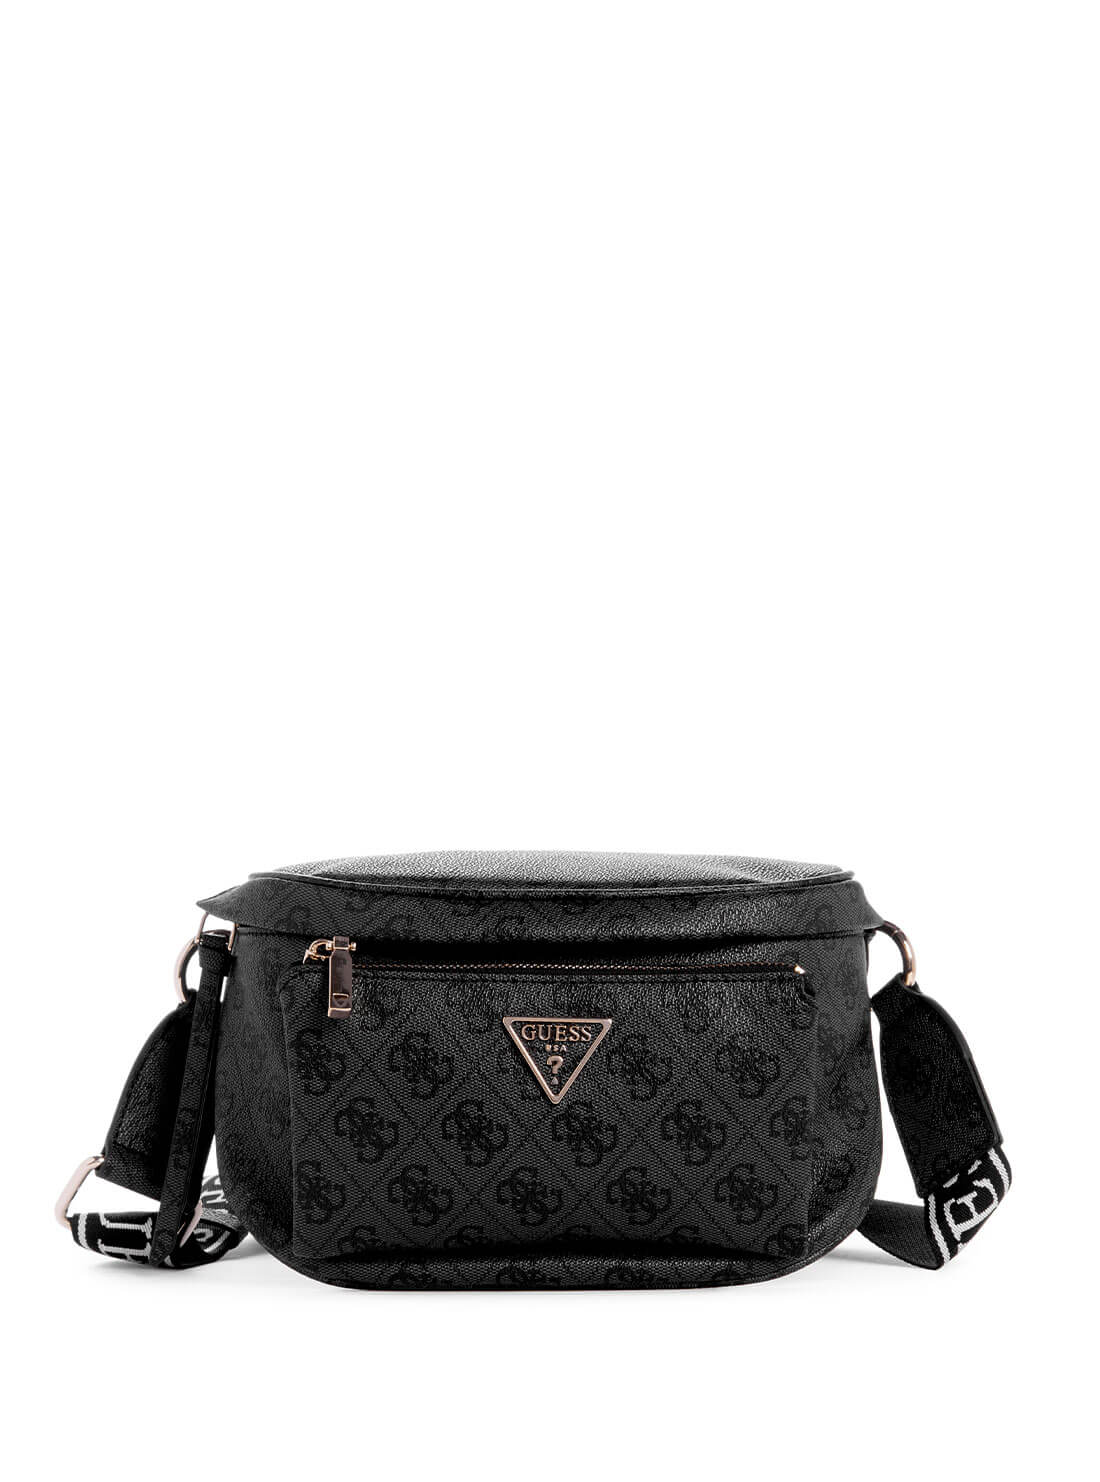 GUESS Black Logo Power Play Sling Bag front view